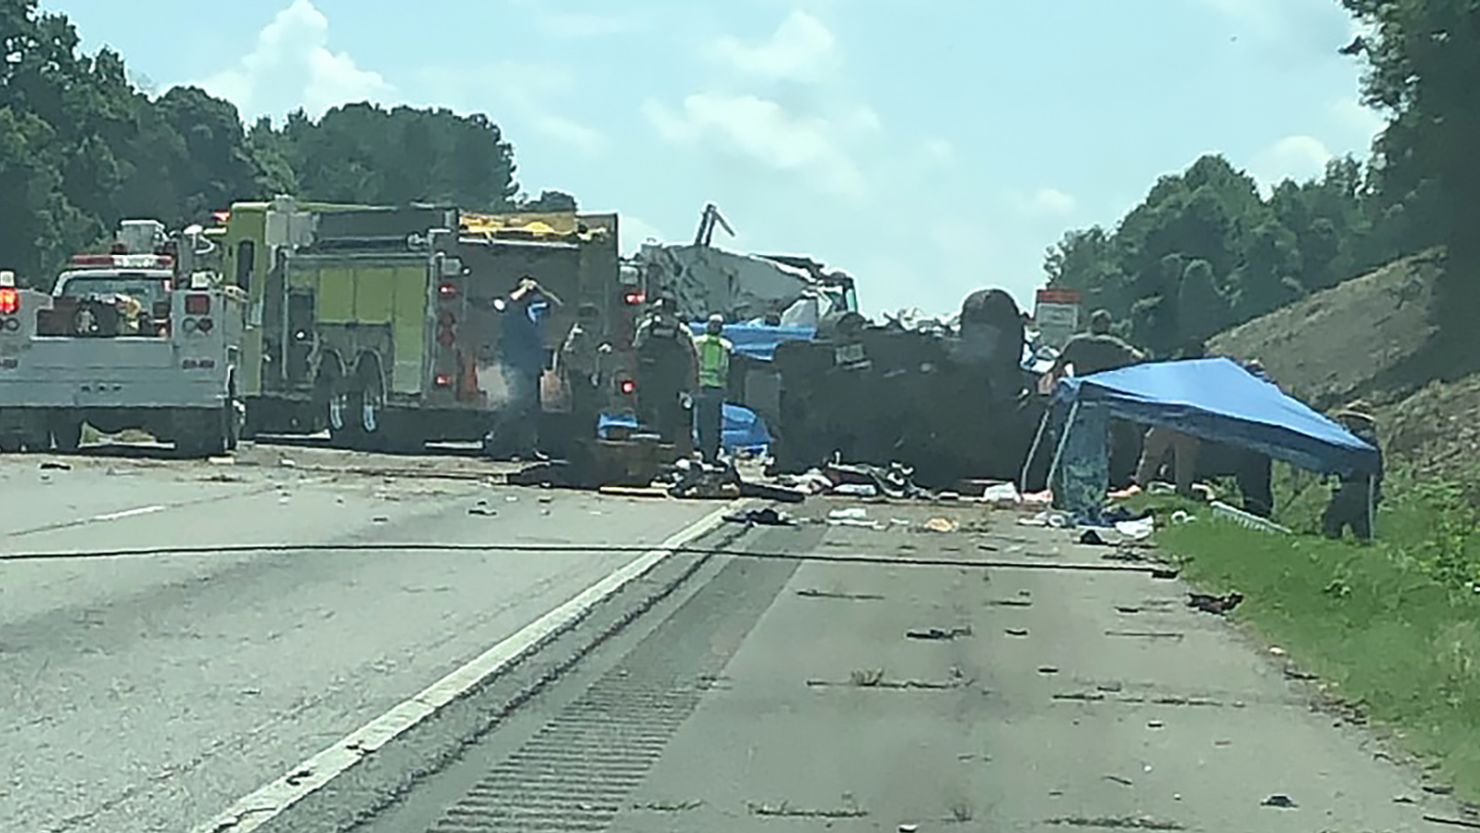 Seven people died in a crash on Interstate-85 in Georgia on Saturday.